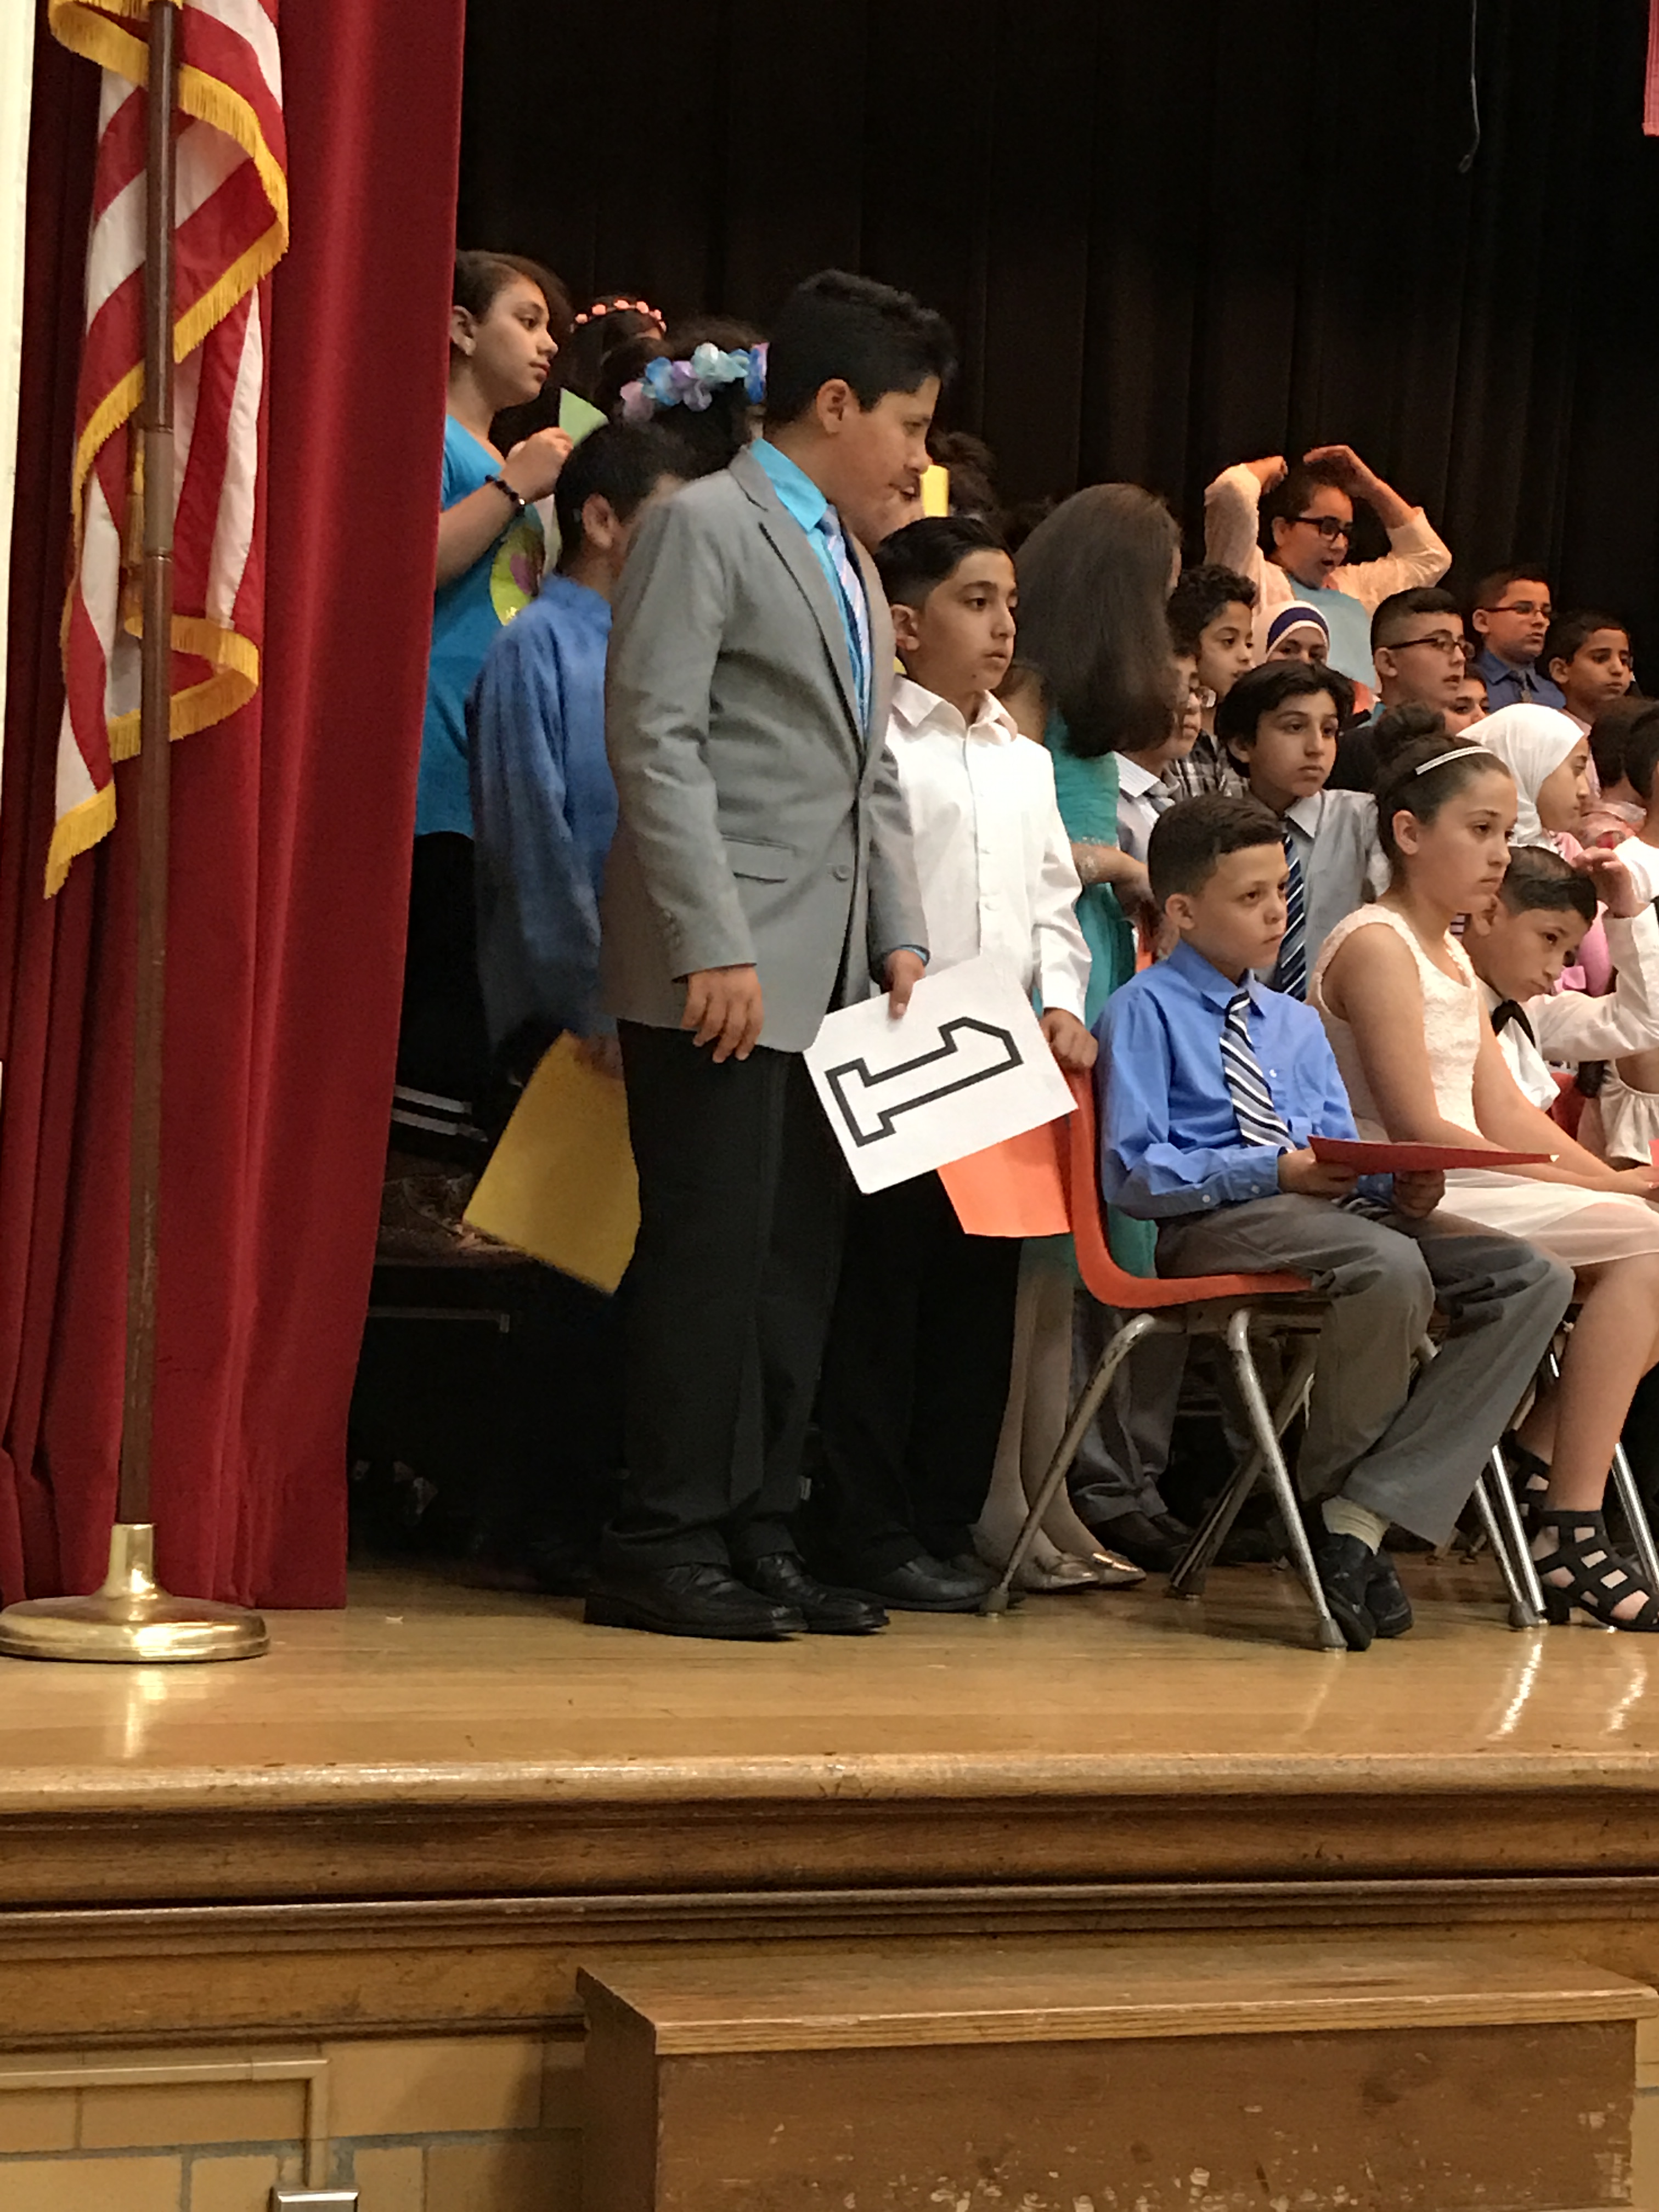 5th graders rehearsing for the promotion ceremony